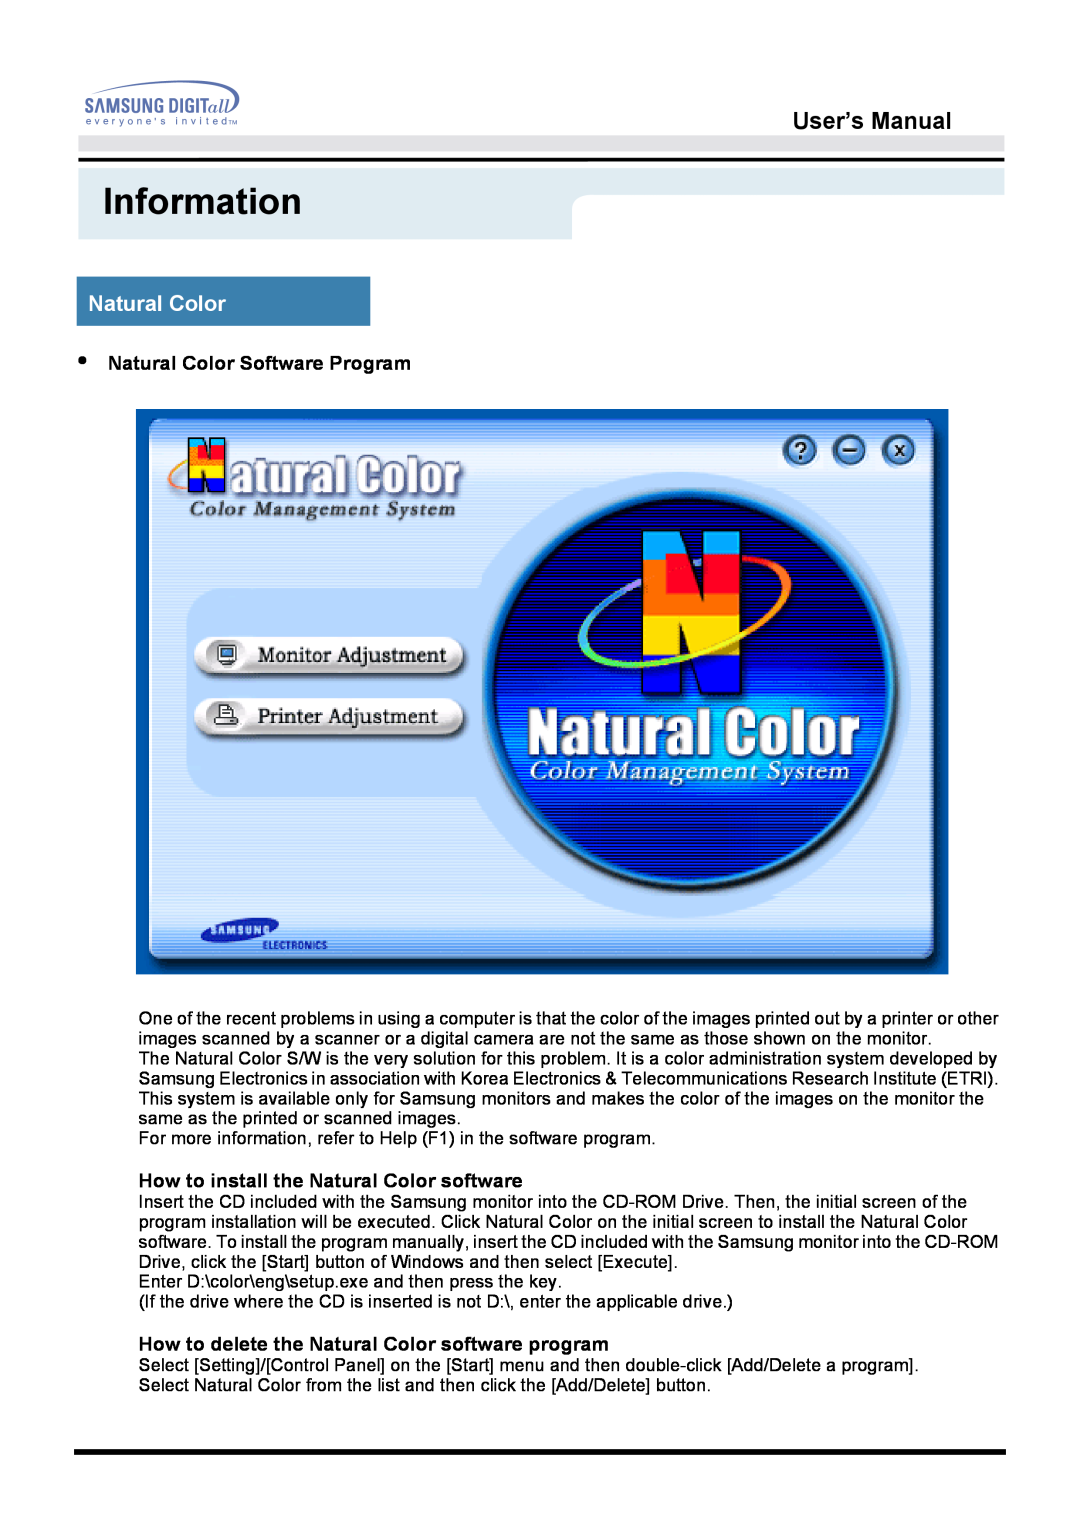 Samsung 192B Information, User’s Manual, Natural Color Software Program, How to install the Natural Color software 